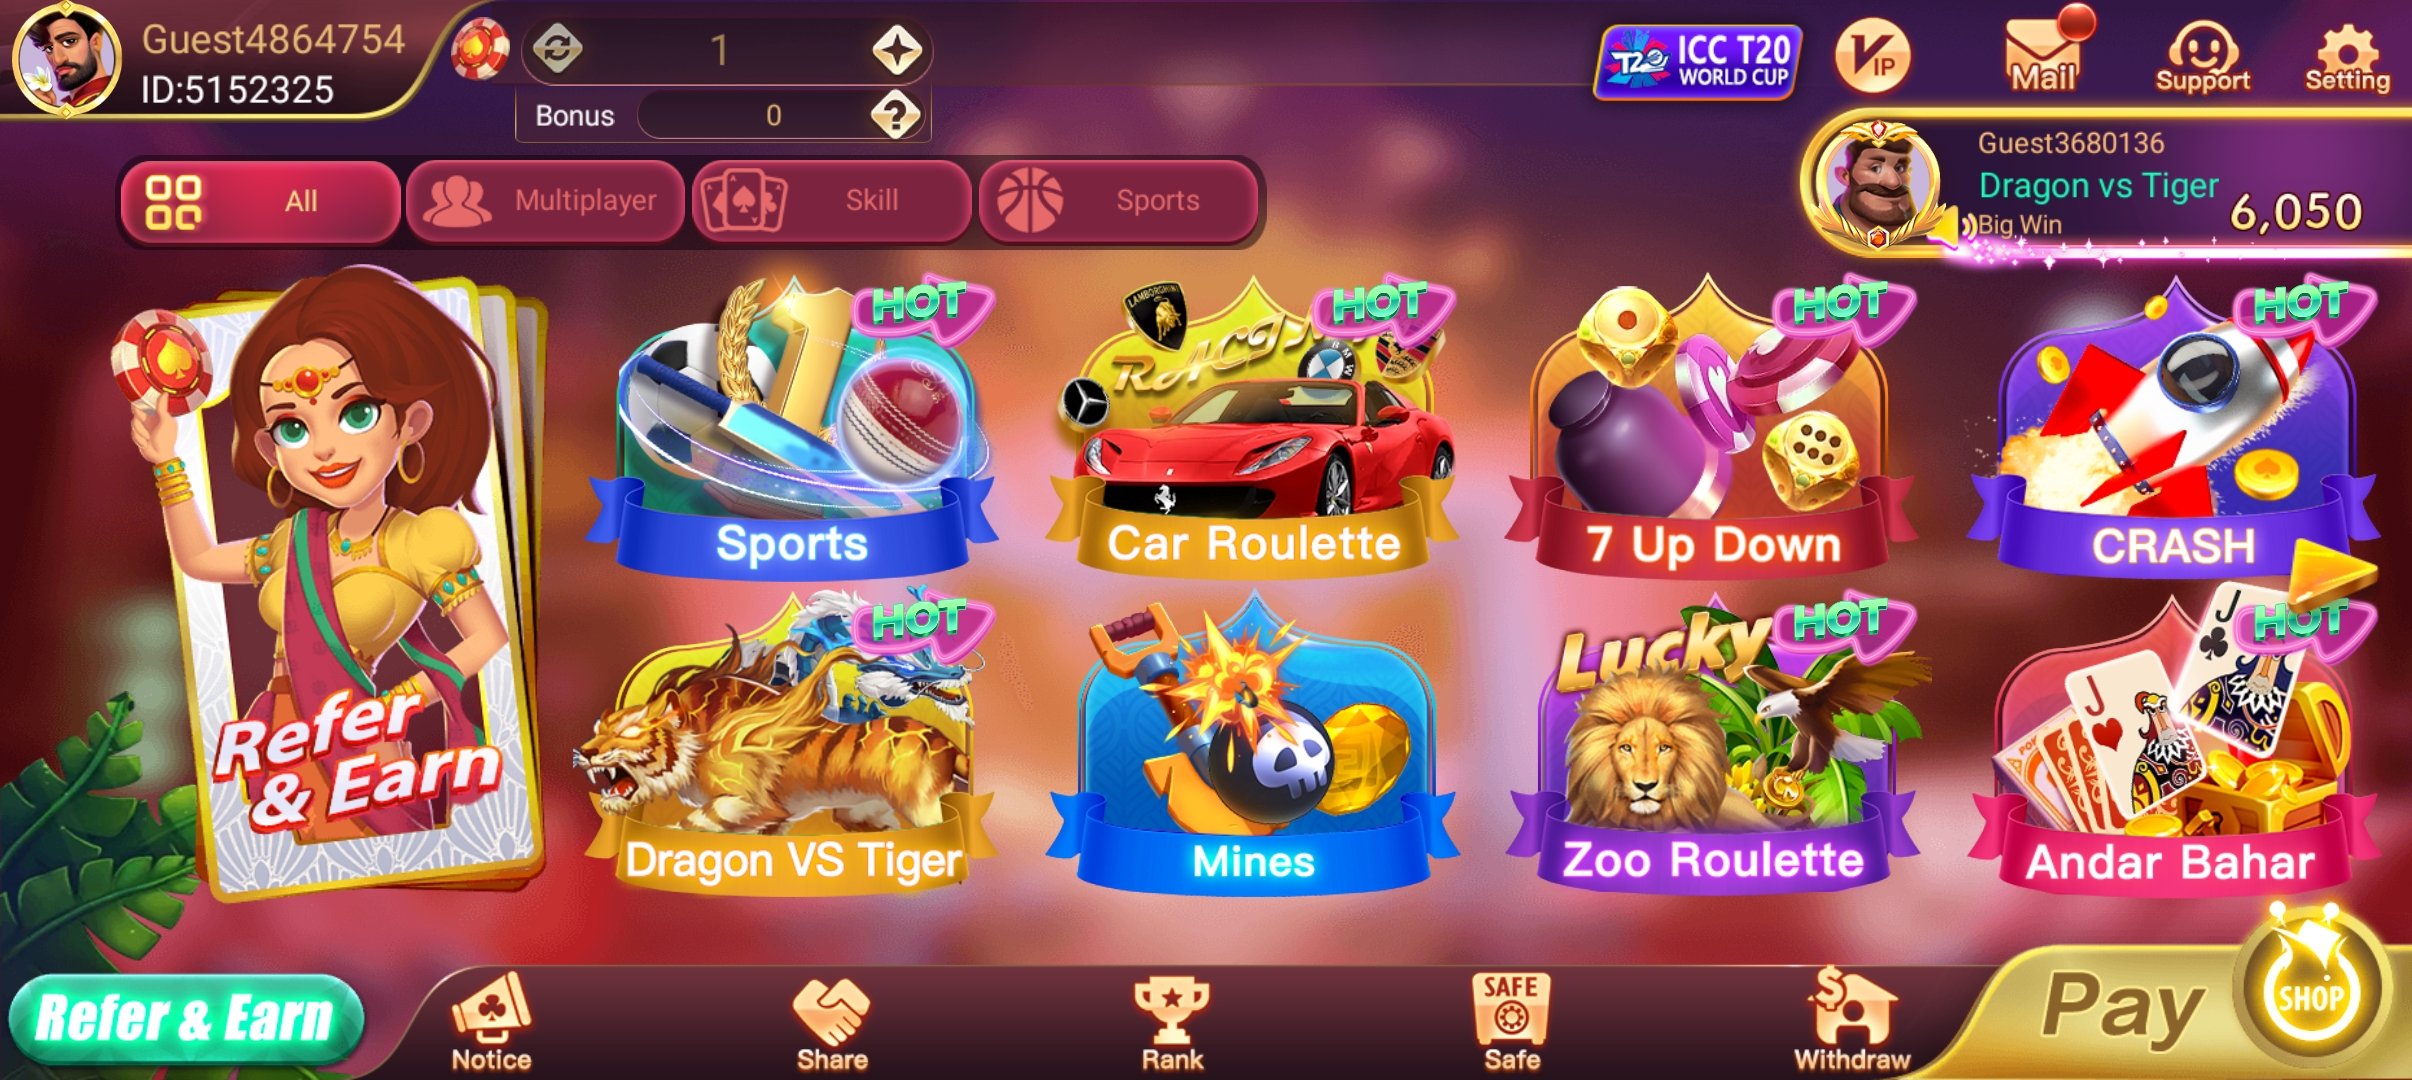 Games Available On Rummy Most